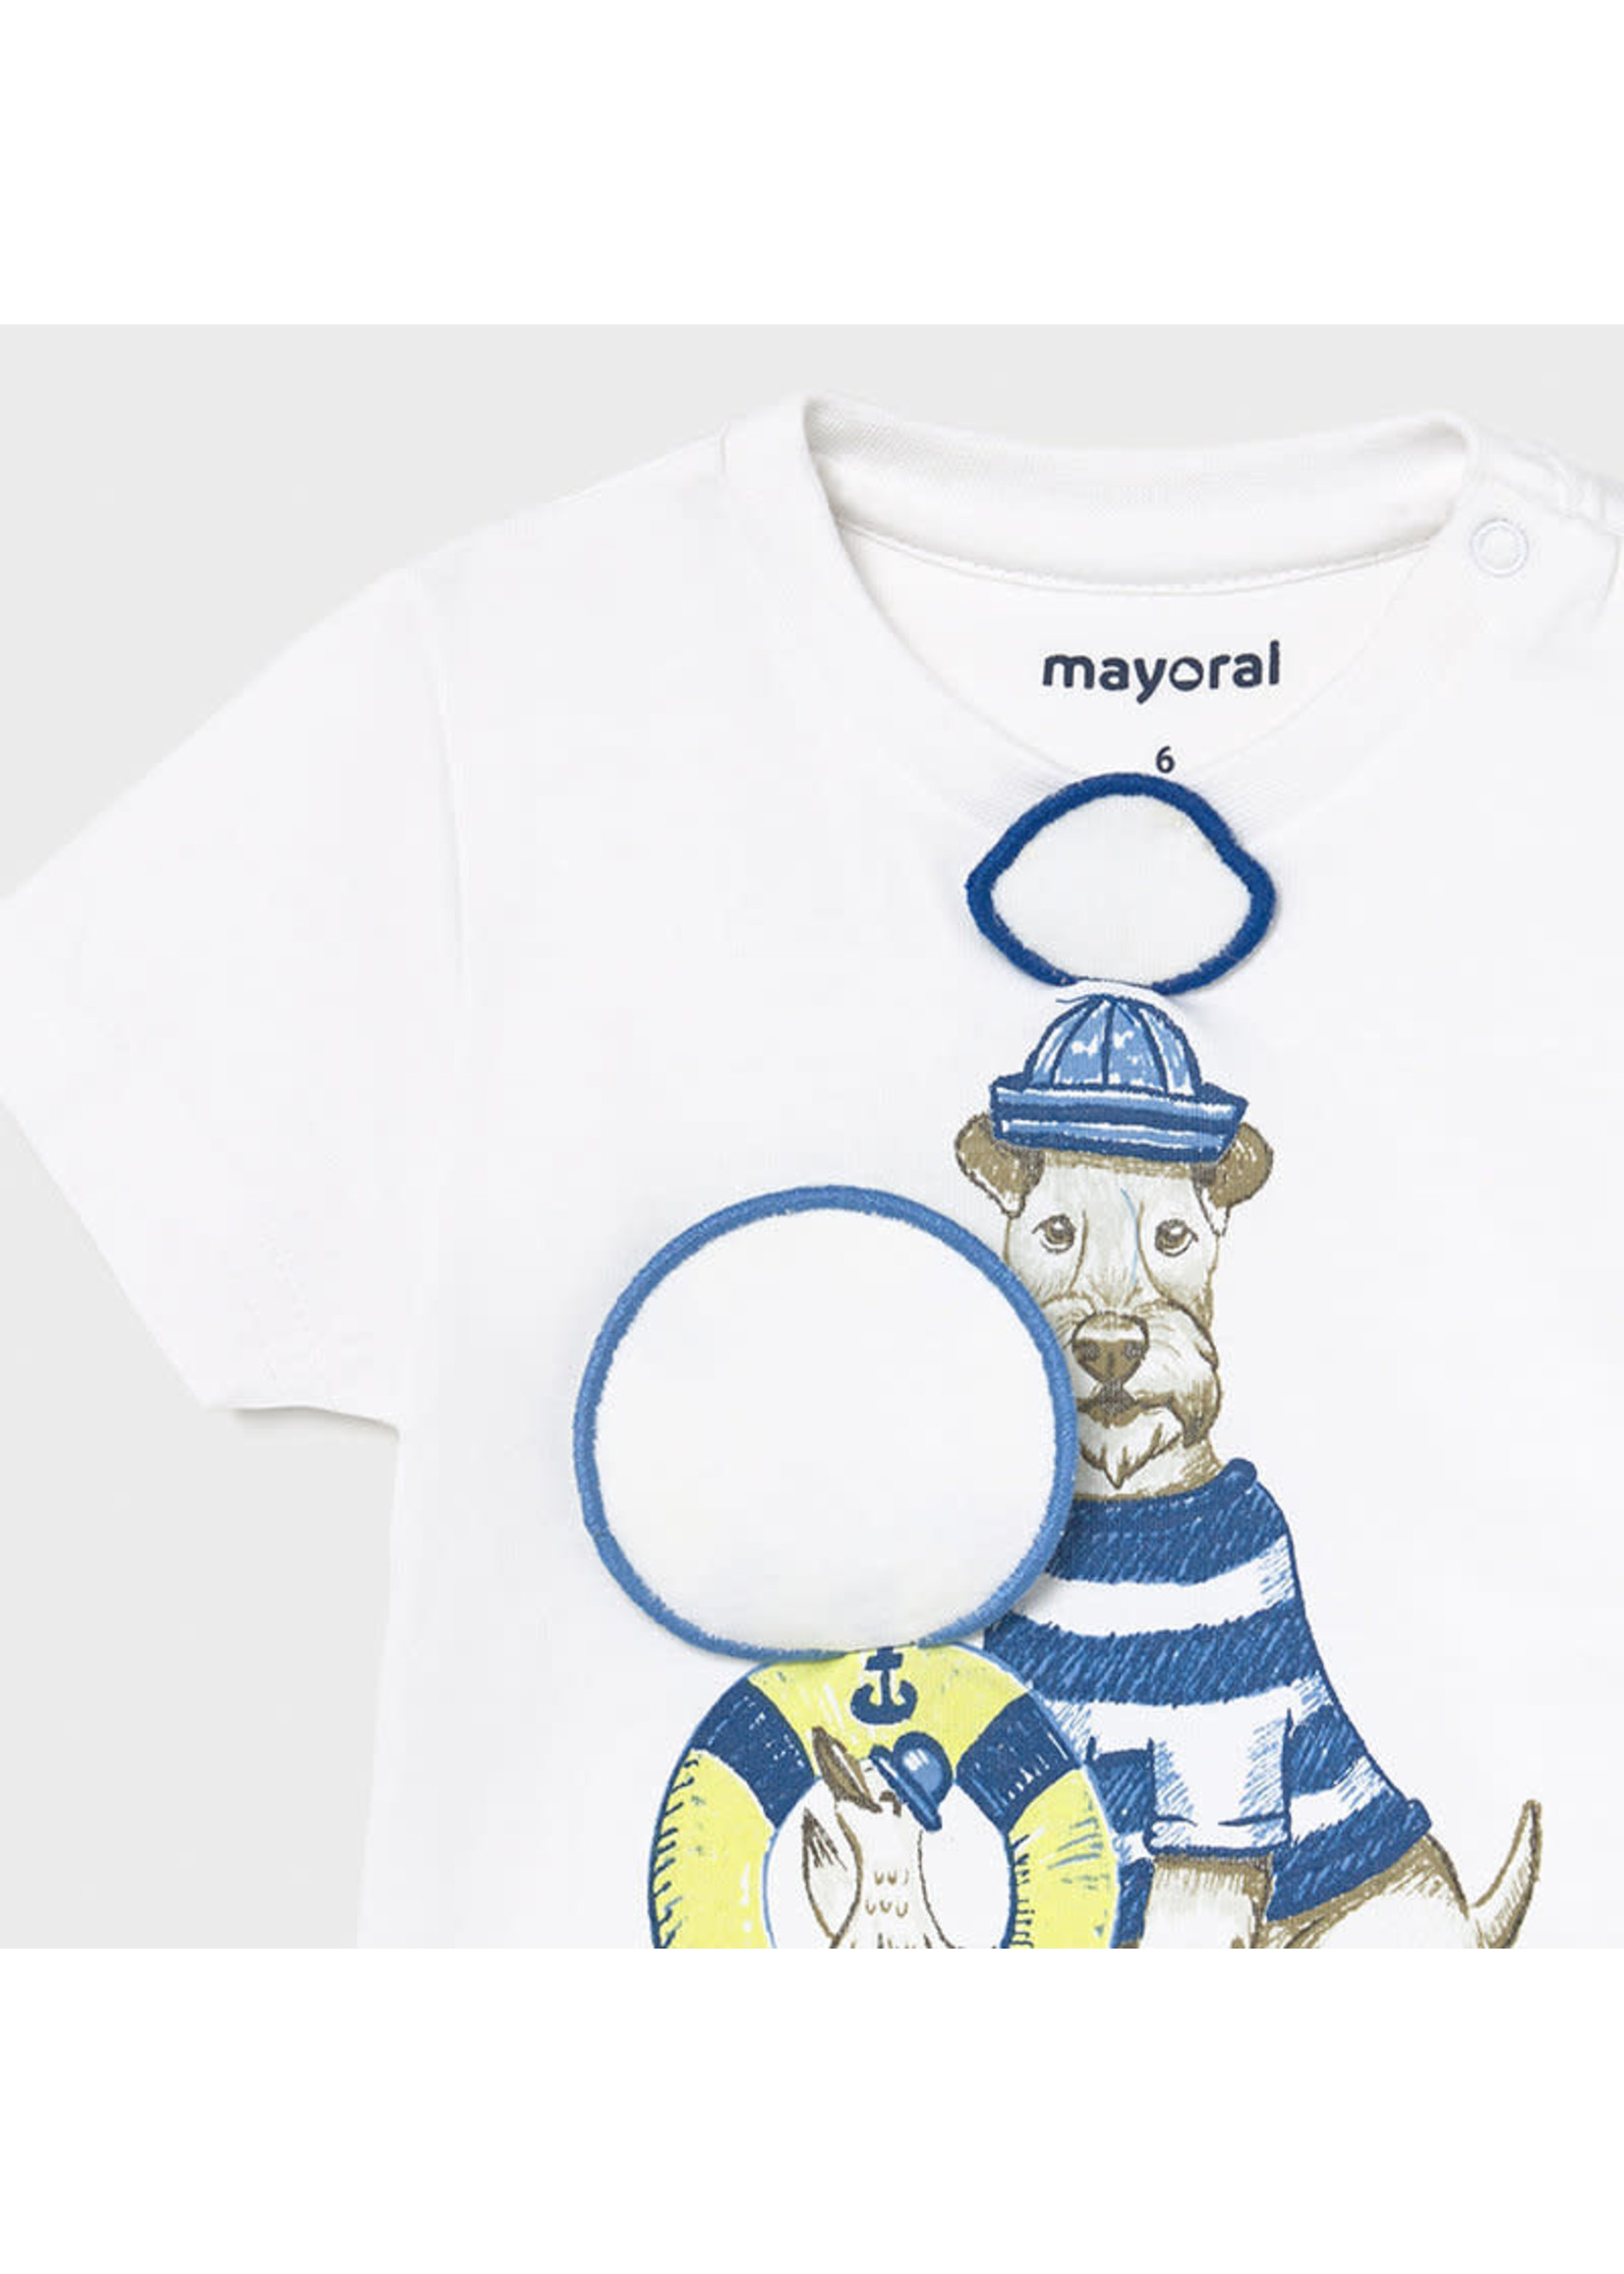 Mayoral Mayoral s/s t-shirt "play" "dogs" White - 21 01007